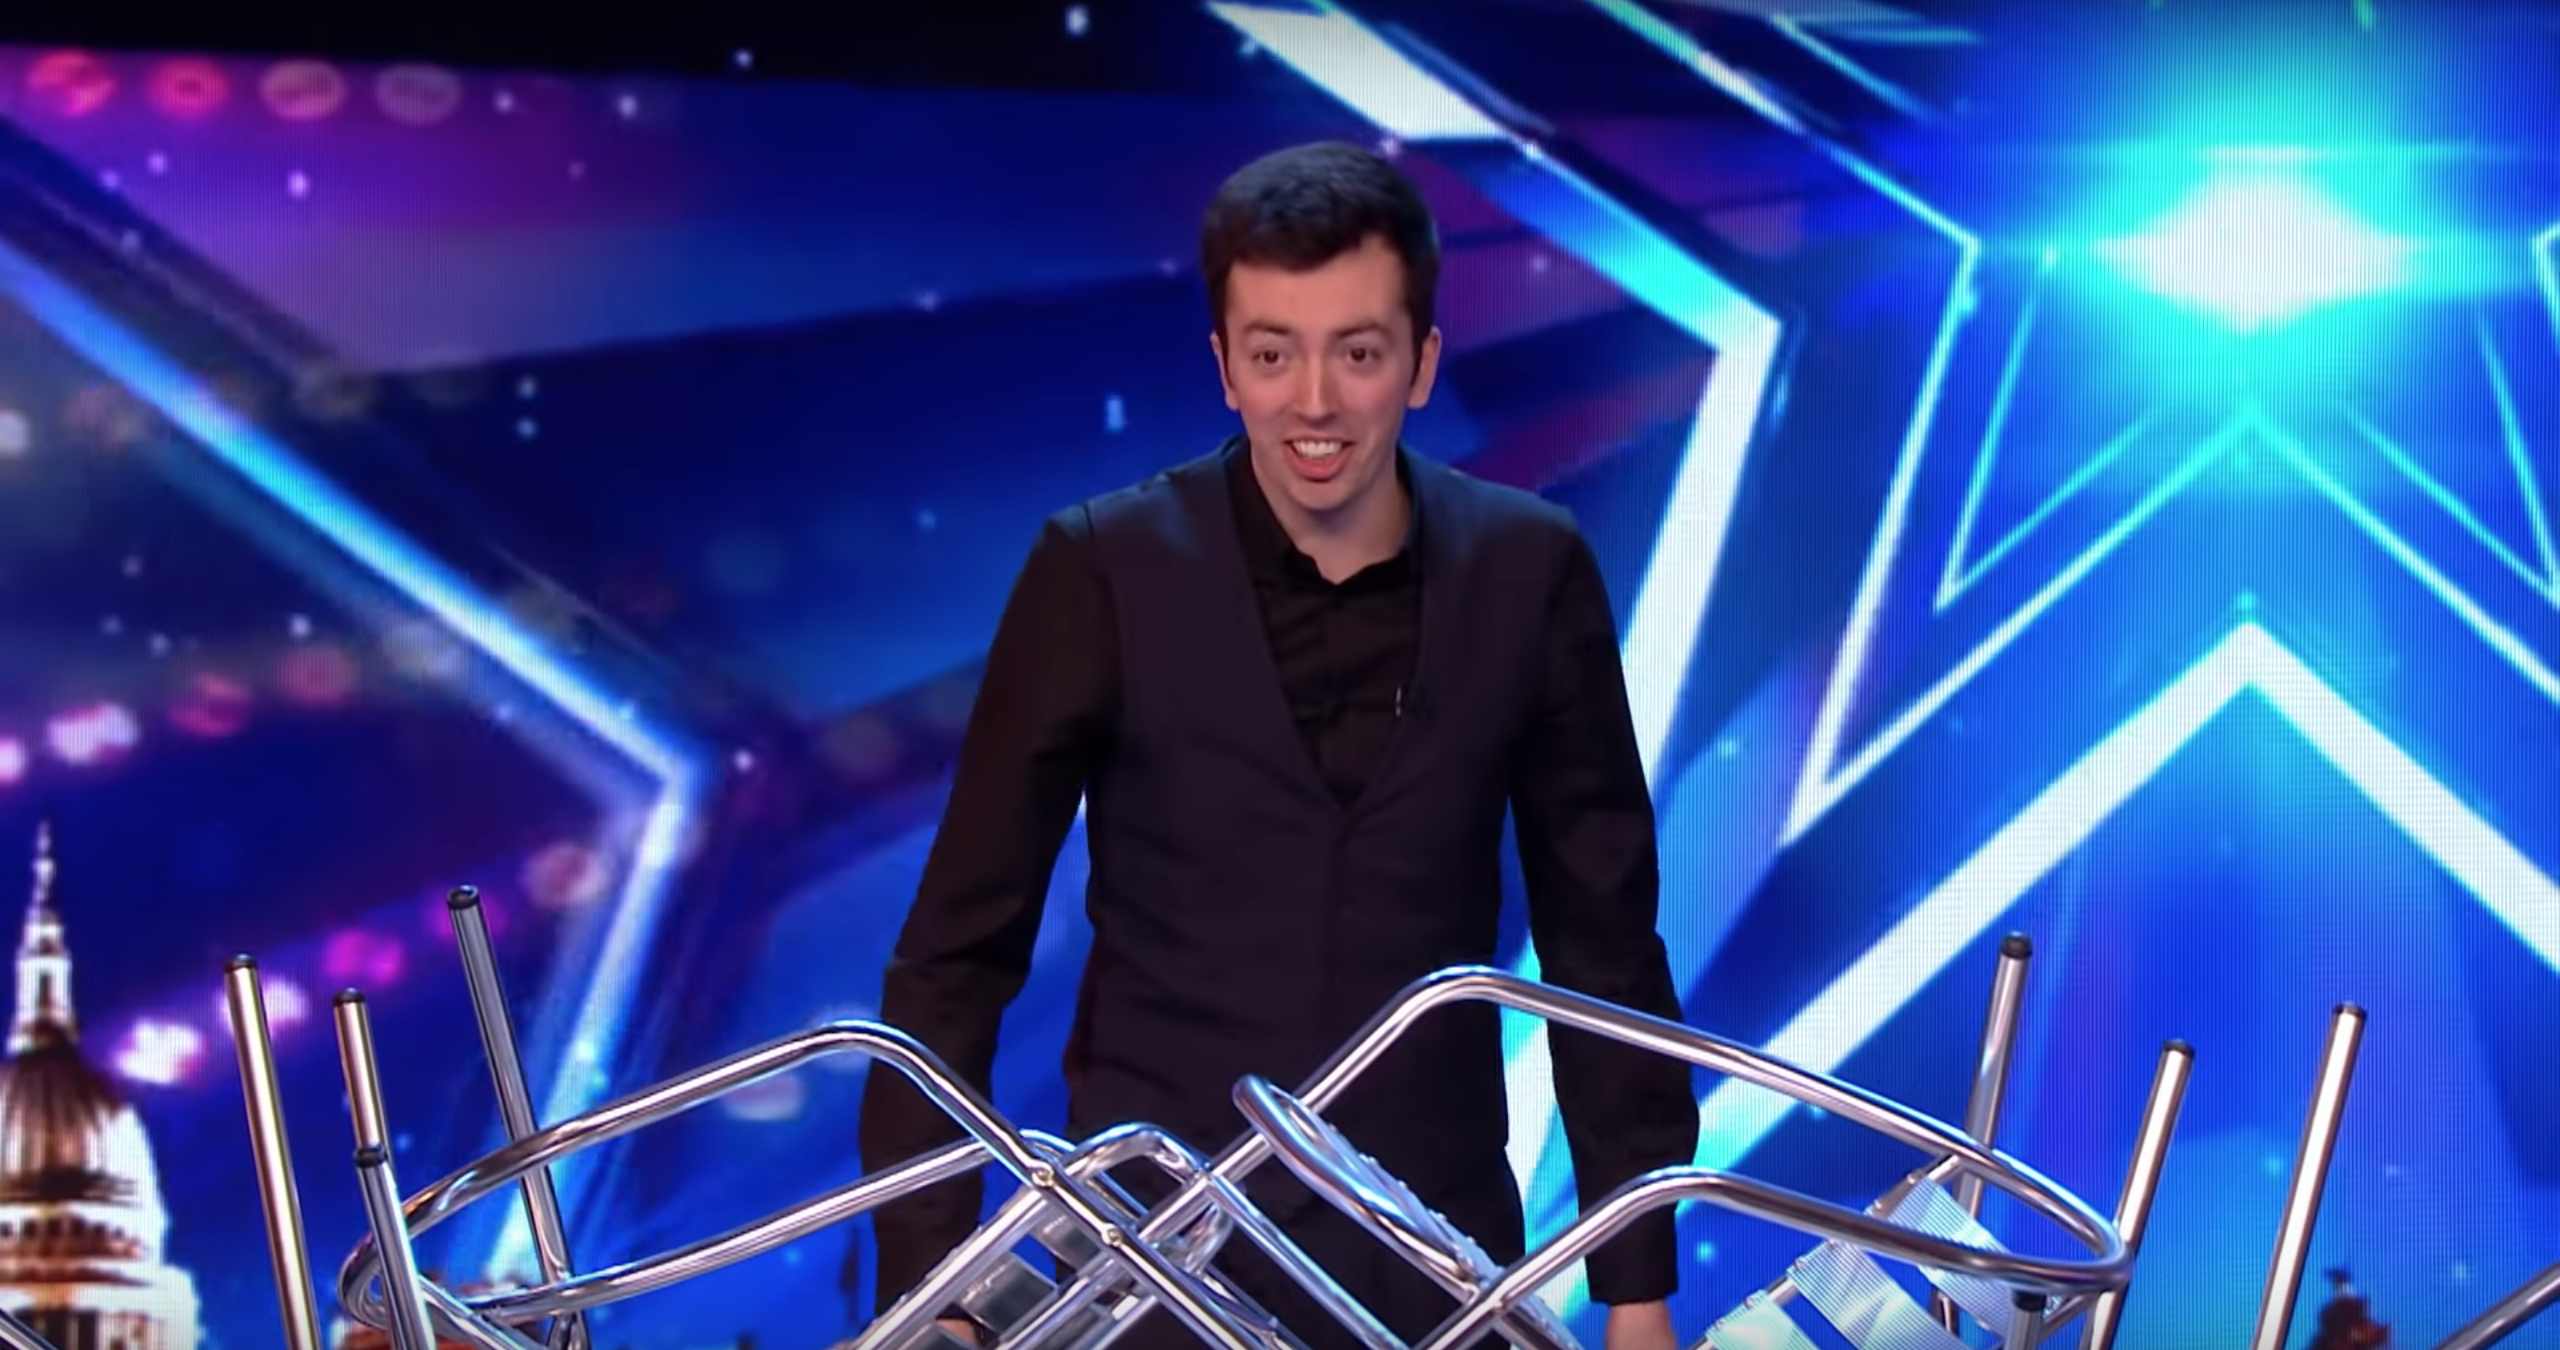 Meet Britain's Got Talent star Jay Rawlings on Instagram - he can do more than balance chairs!